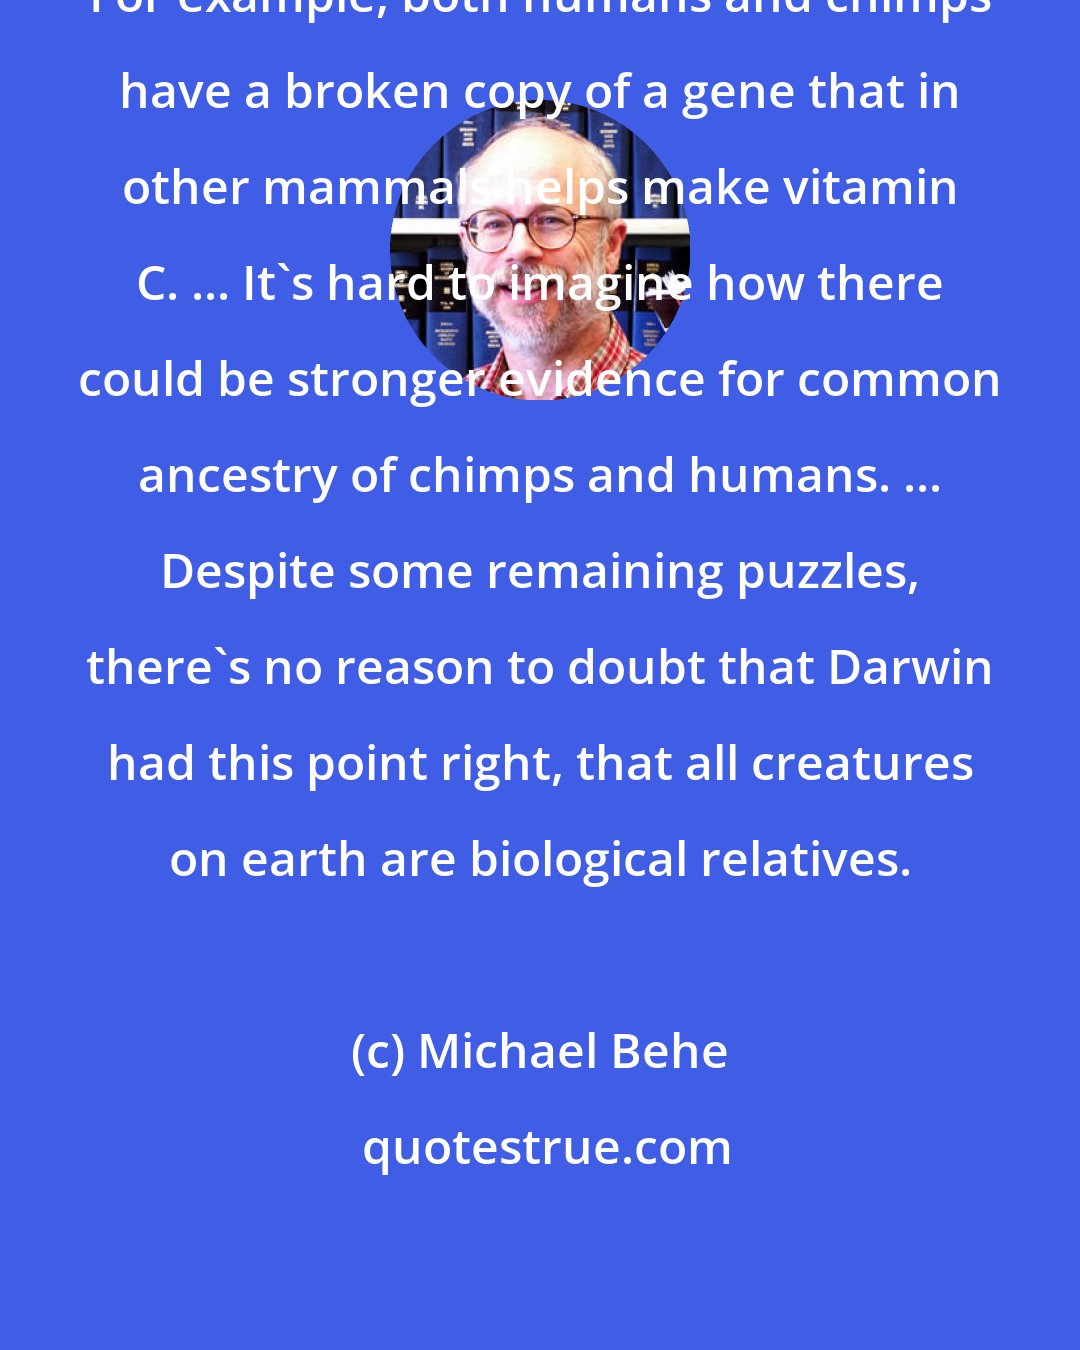 Michael Behe: For example, both humans and chimps have a broken copy of a gene that in other mammals helps make vitamin C. ... It's hard to imagine how there could be stronger evidence for common ancestry of chimps and humans. ... Despite some remaining puzzles, there's no reason to doubt that Darwin had this point right, that all creatures on earth are biological relatives.